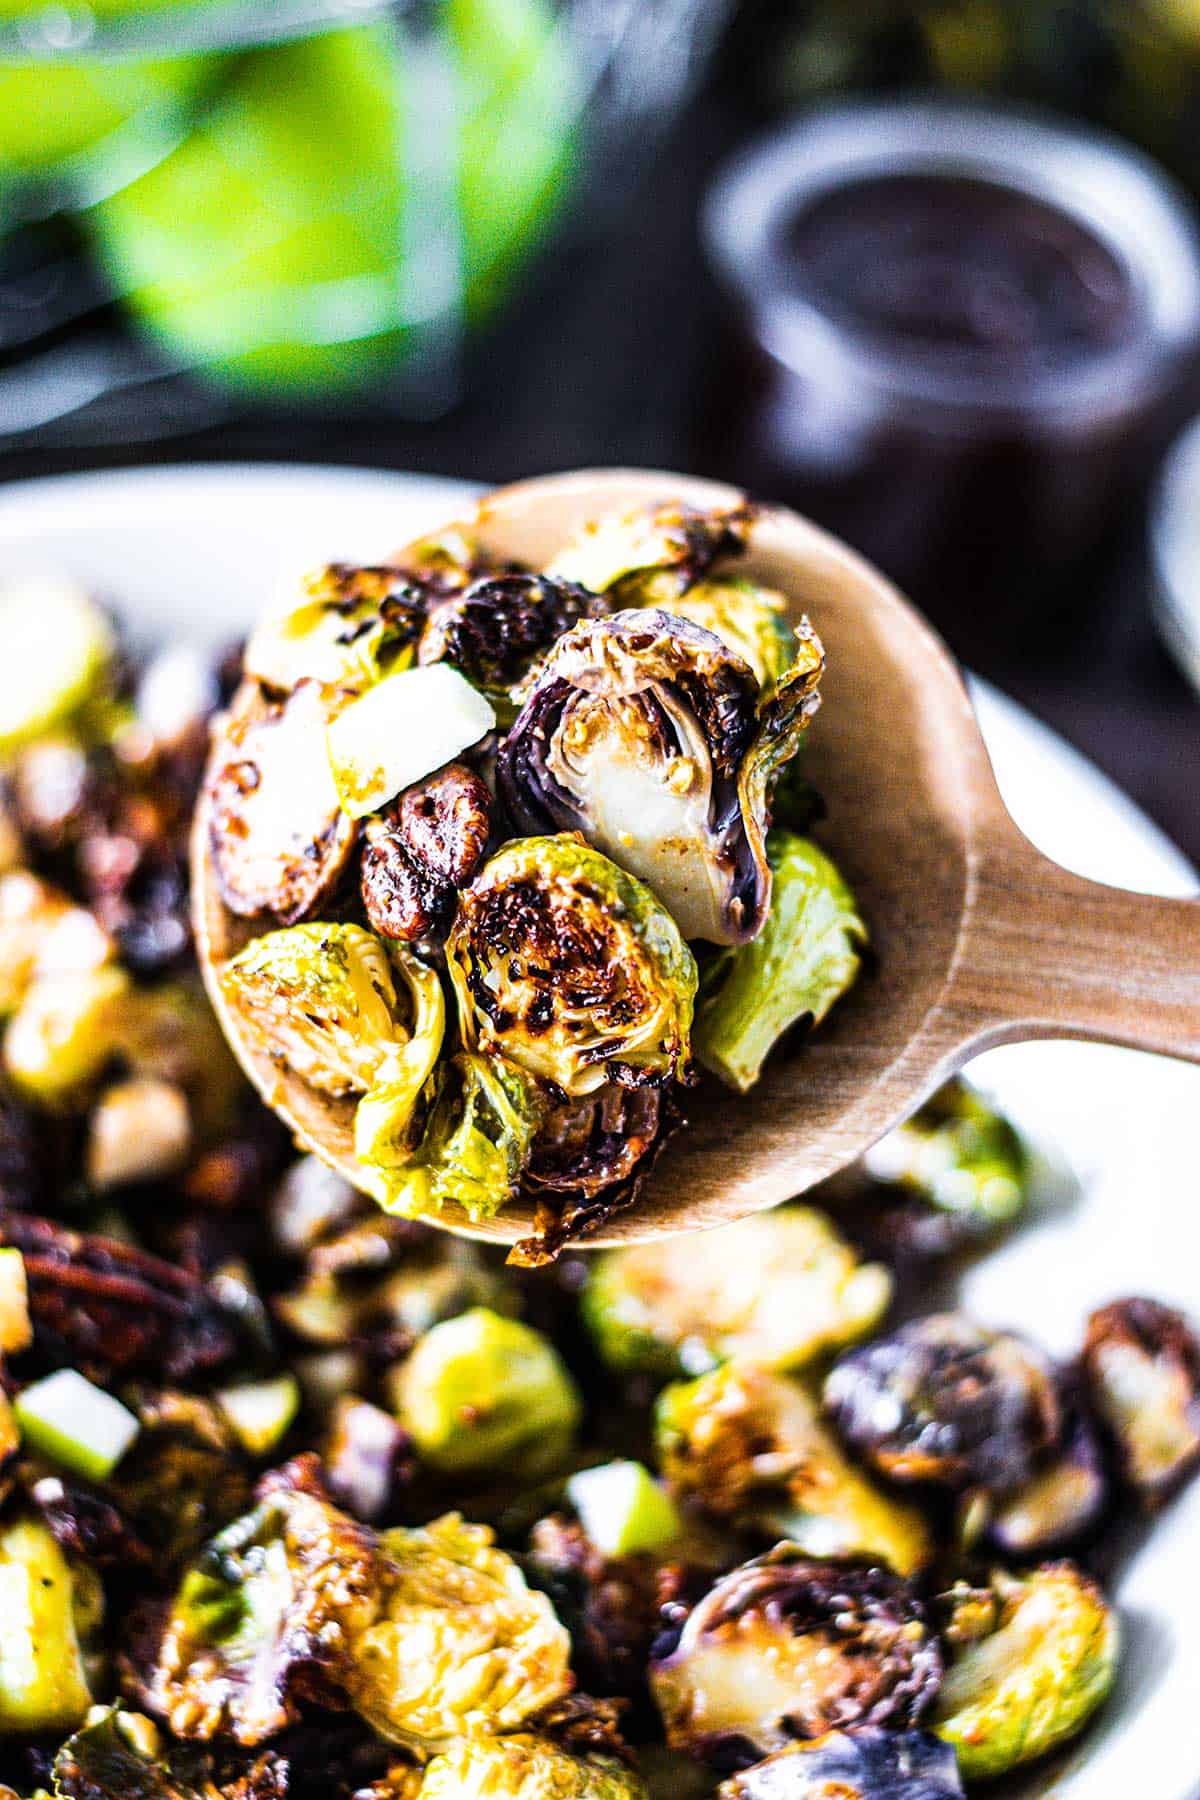 Upclose image of brussels sprouts being scooped on a wooden serving spoon.